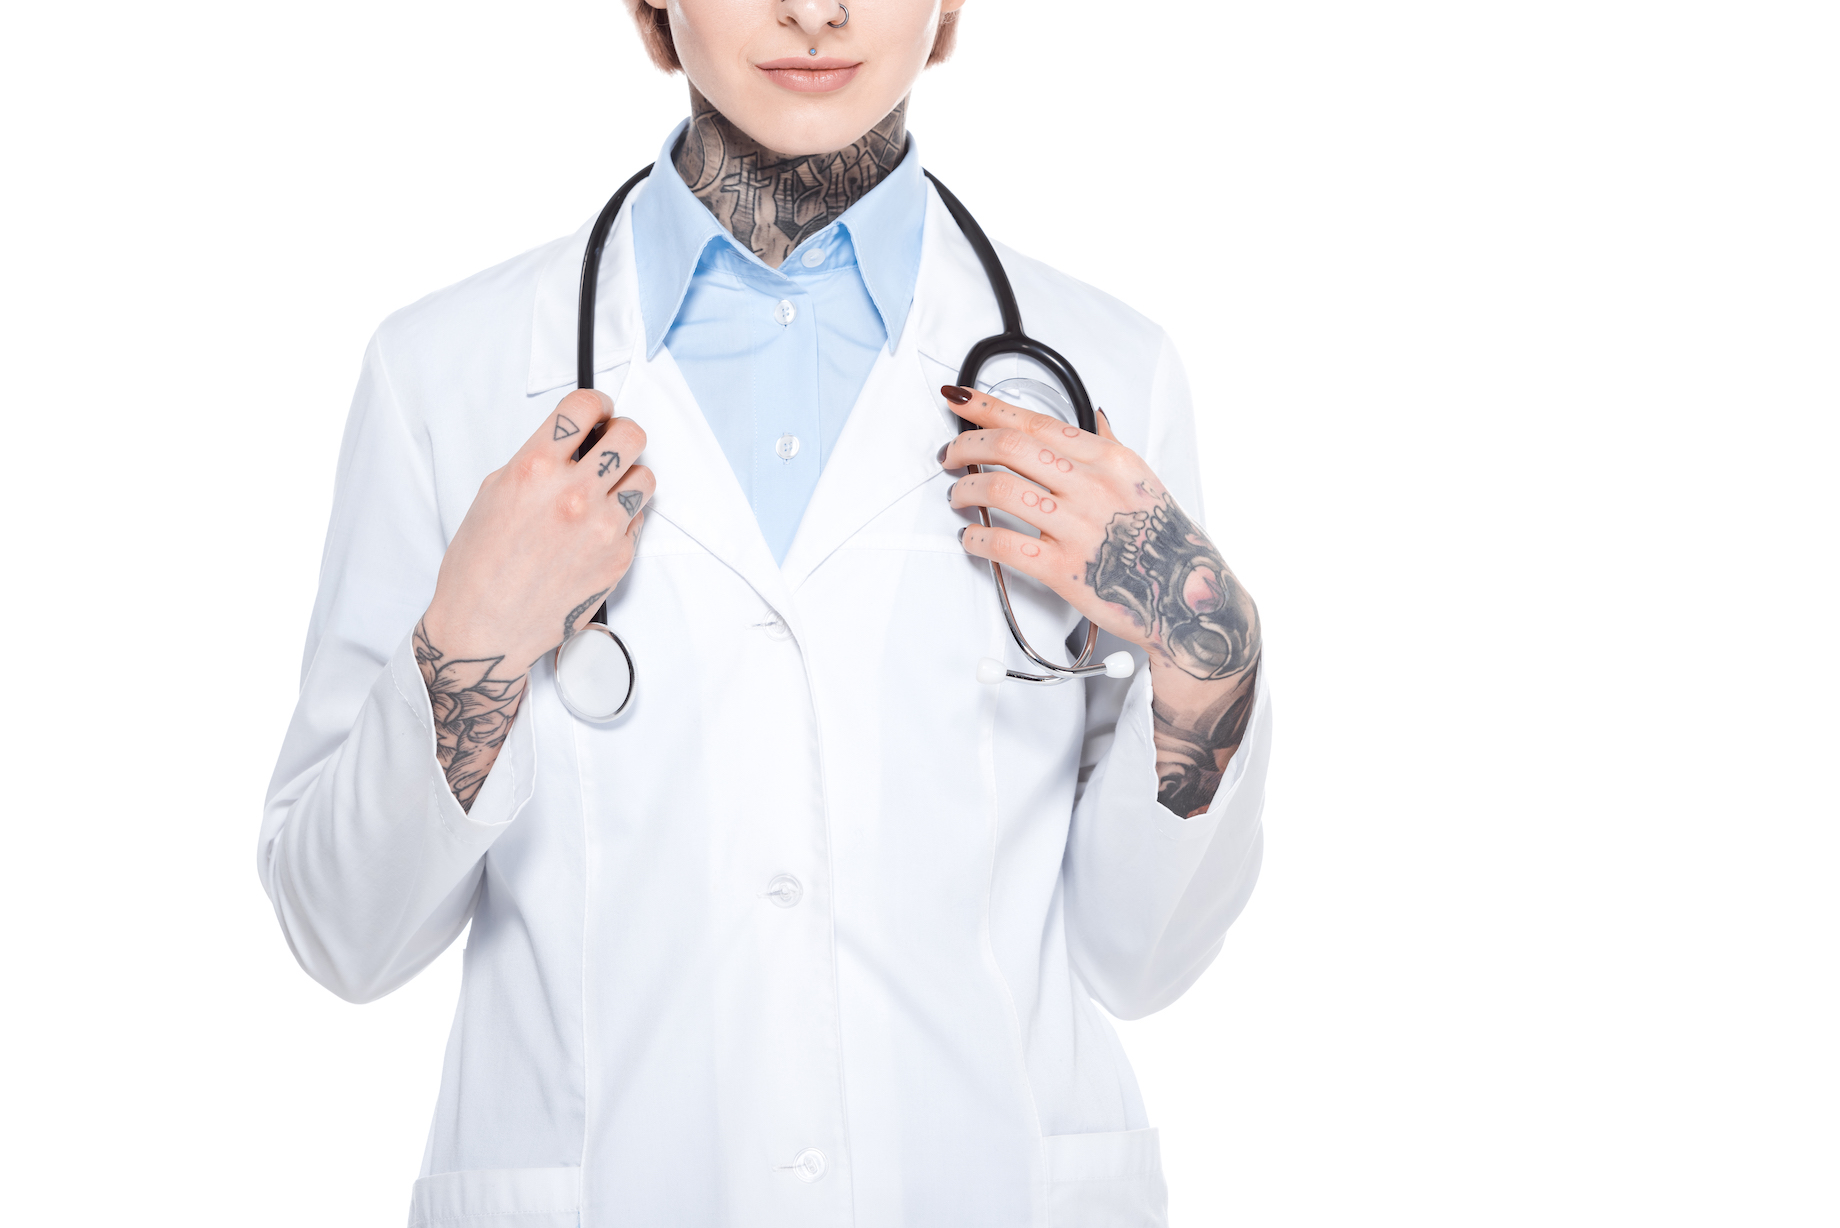 Should doctors show their tattoos at work DOs speak out  The DO